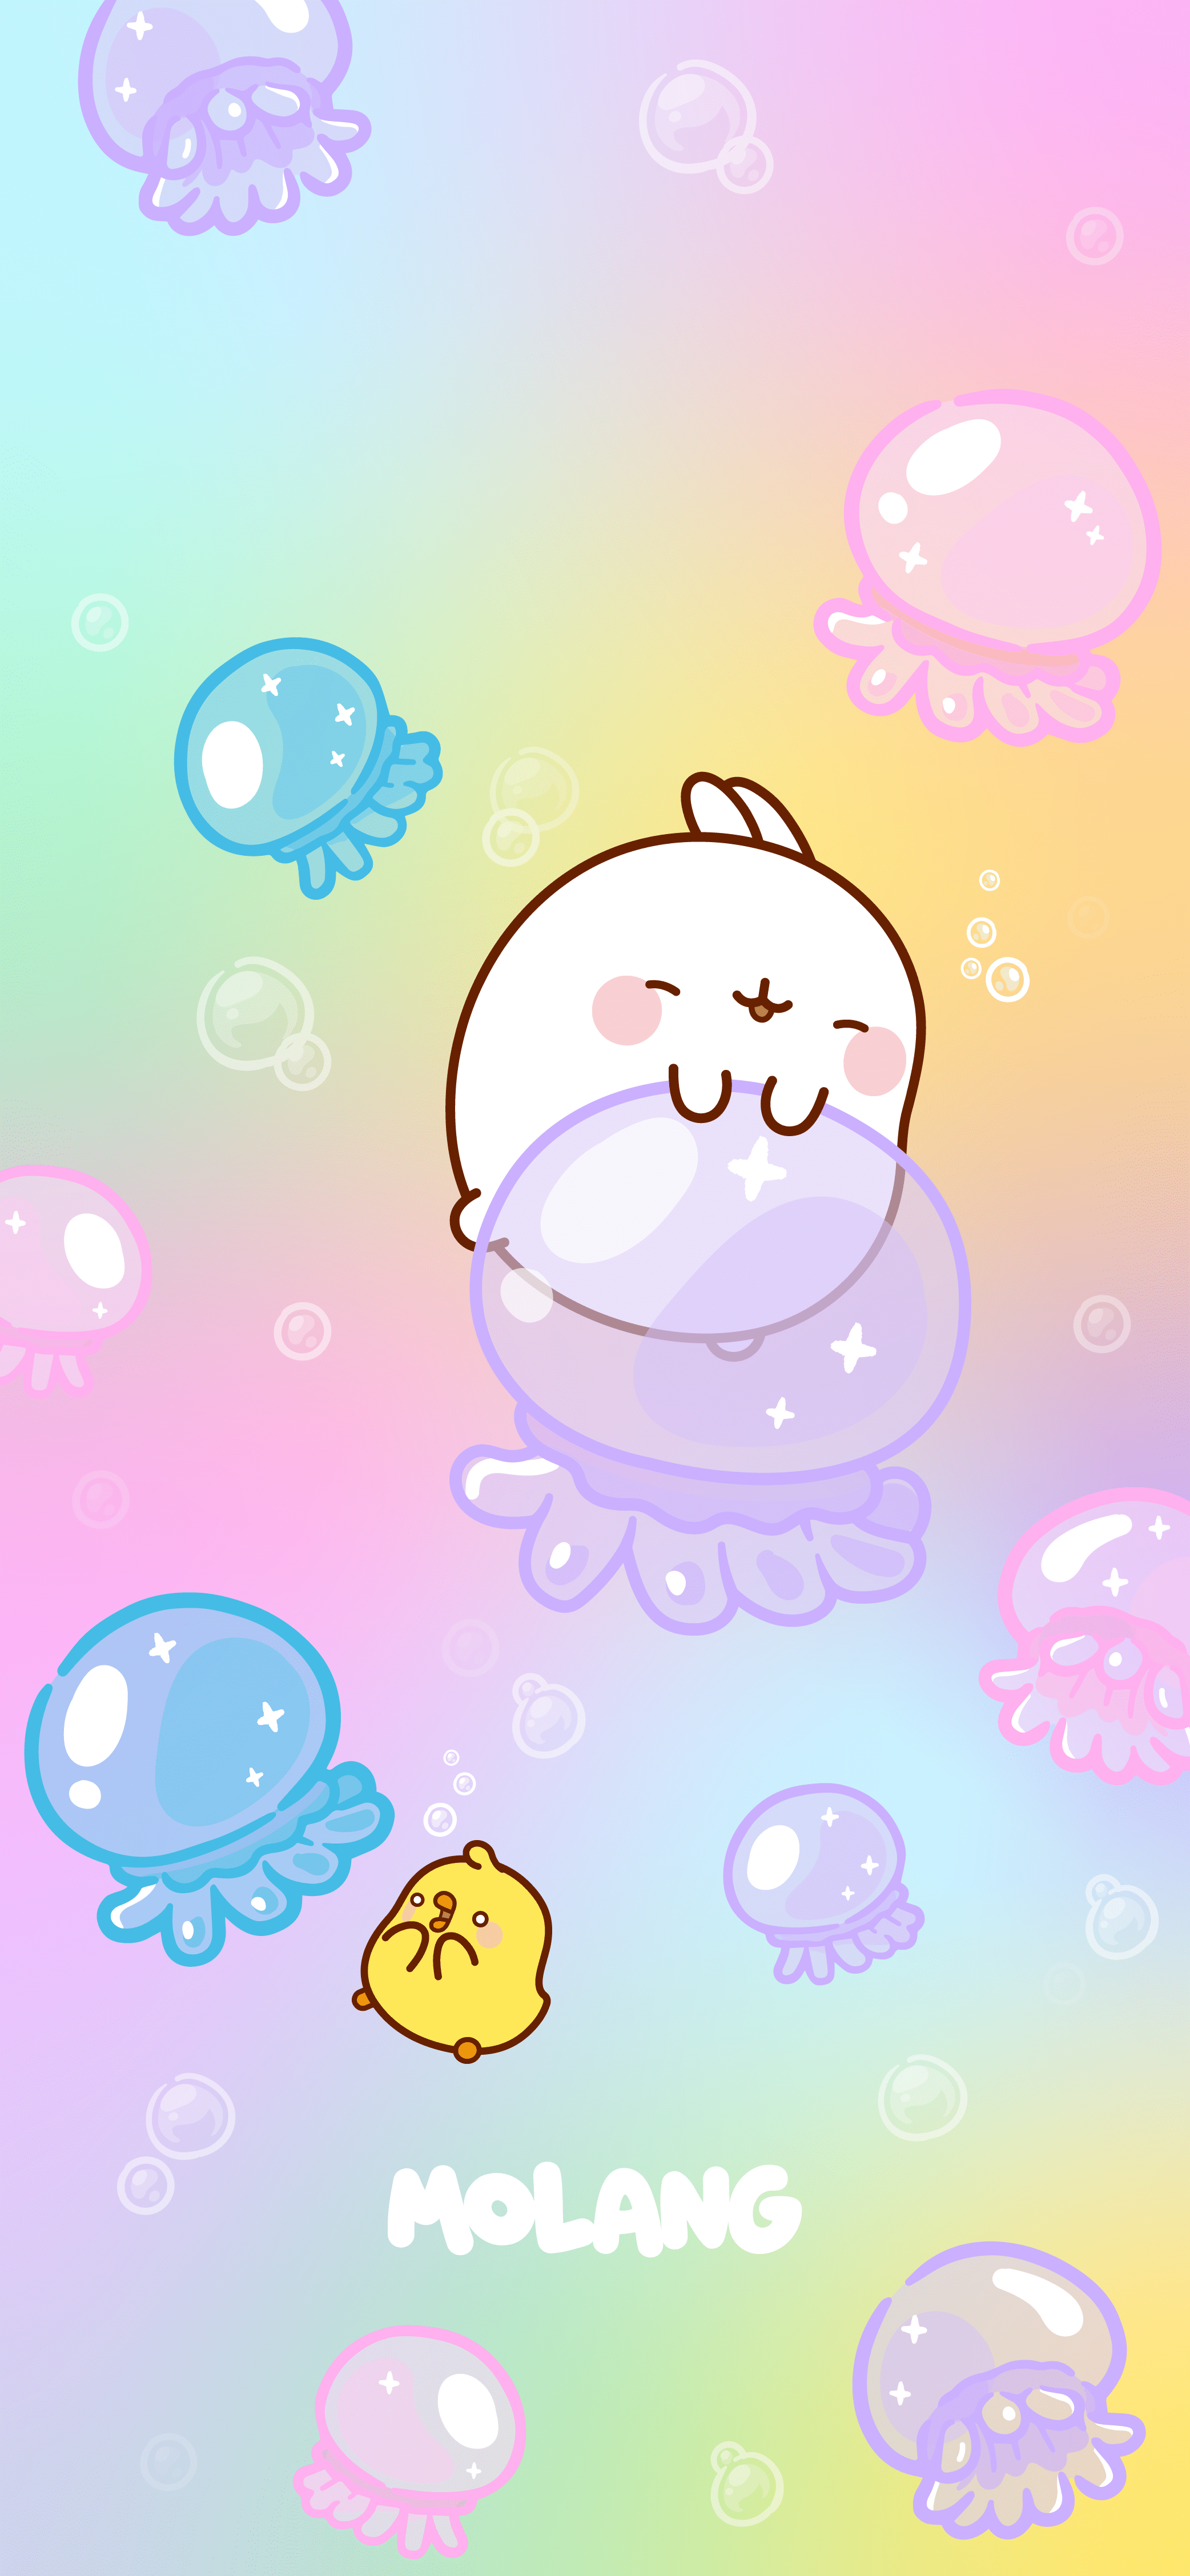 A cute Molang rabbit wallpaper with many jellyfishes in the background - Molang